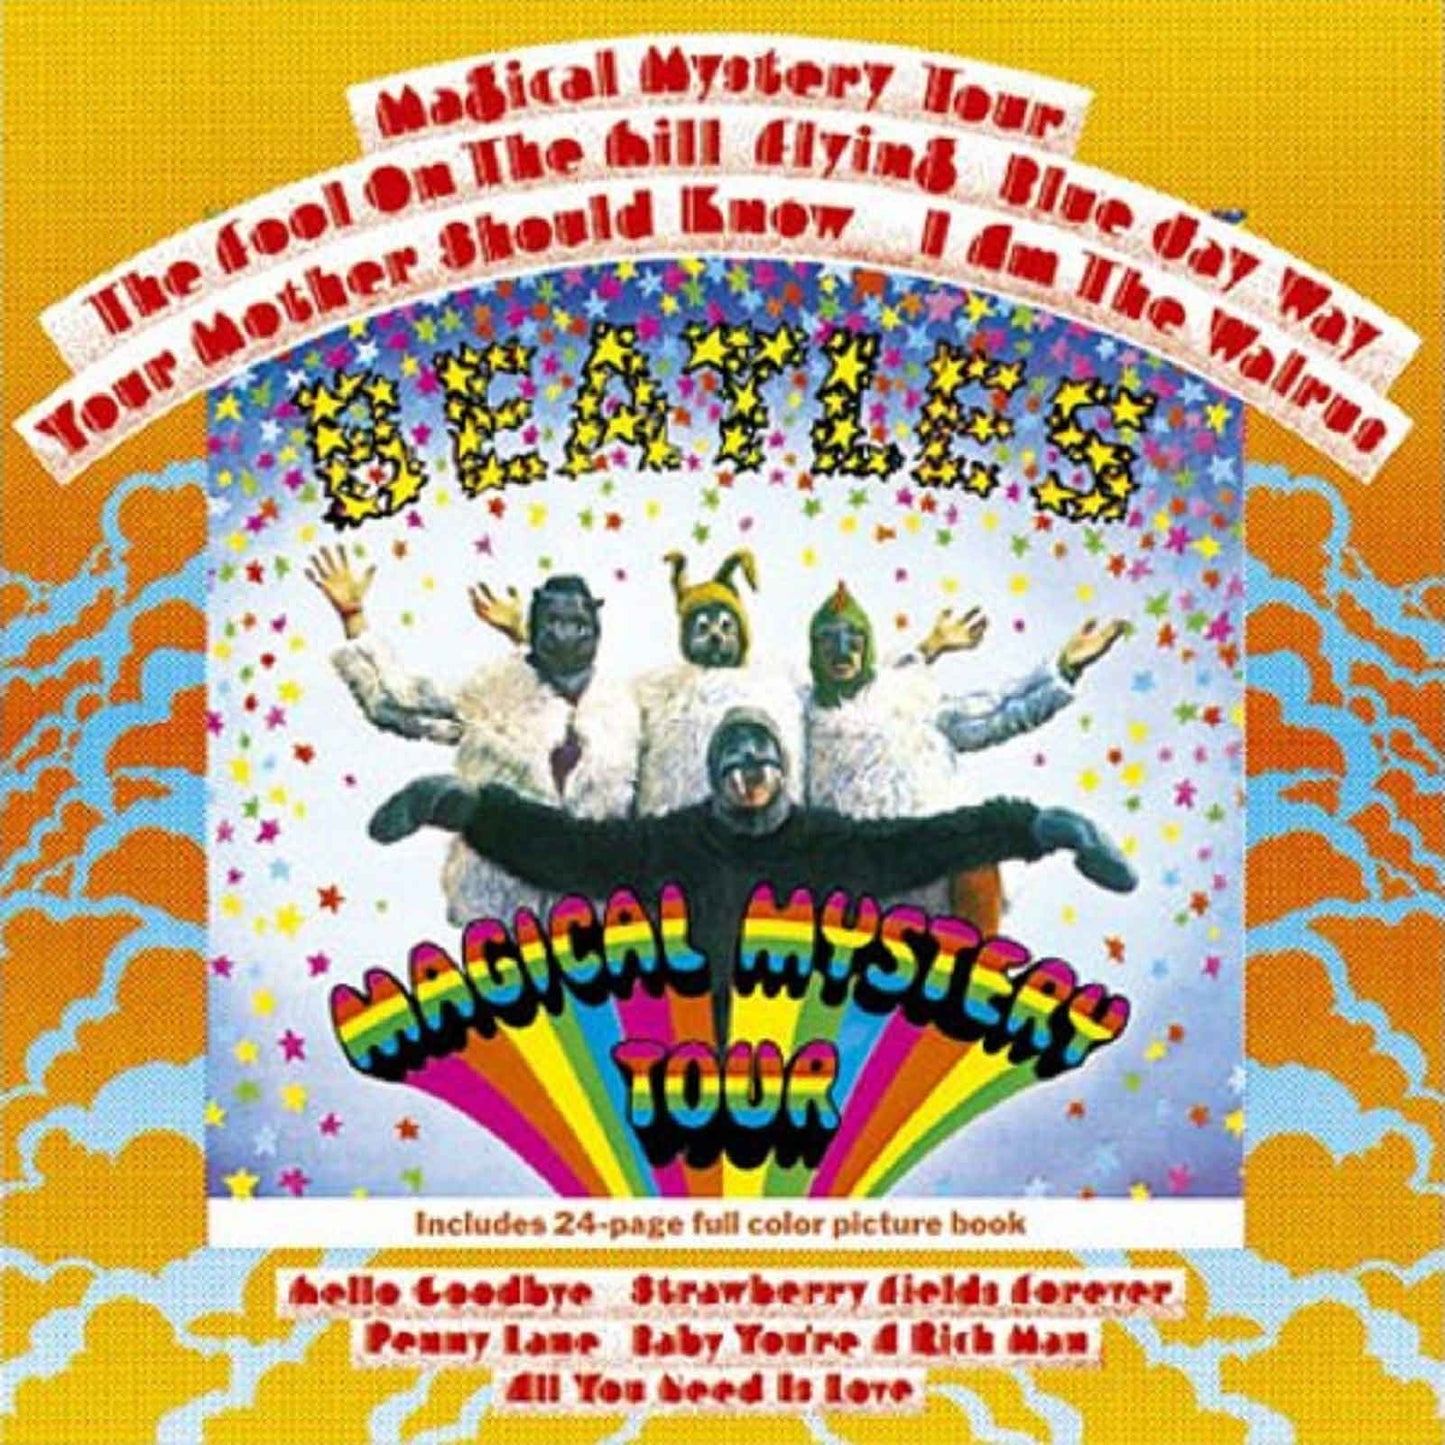 The Beatles Magical Mystery Tour Greeting Card